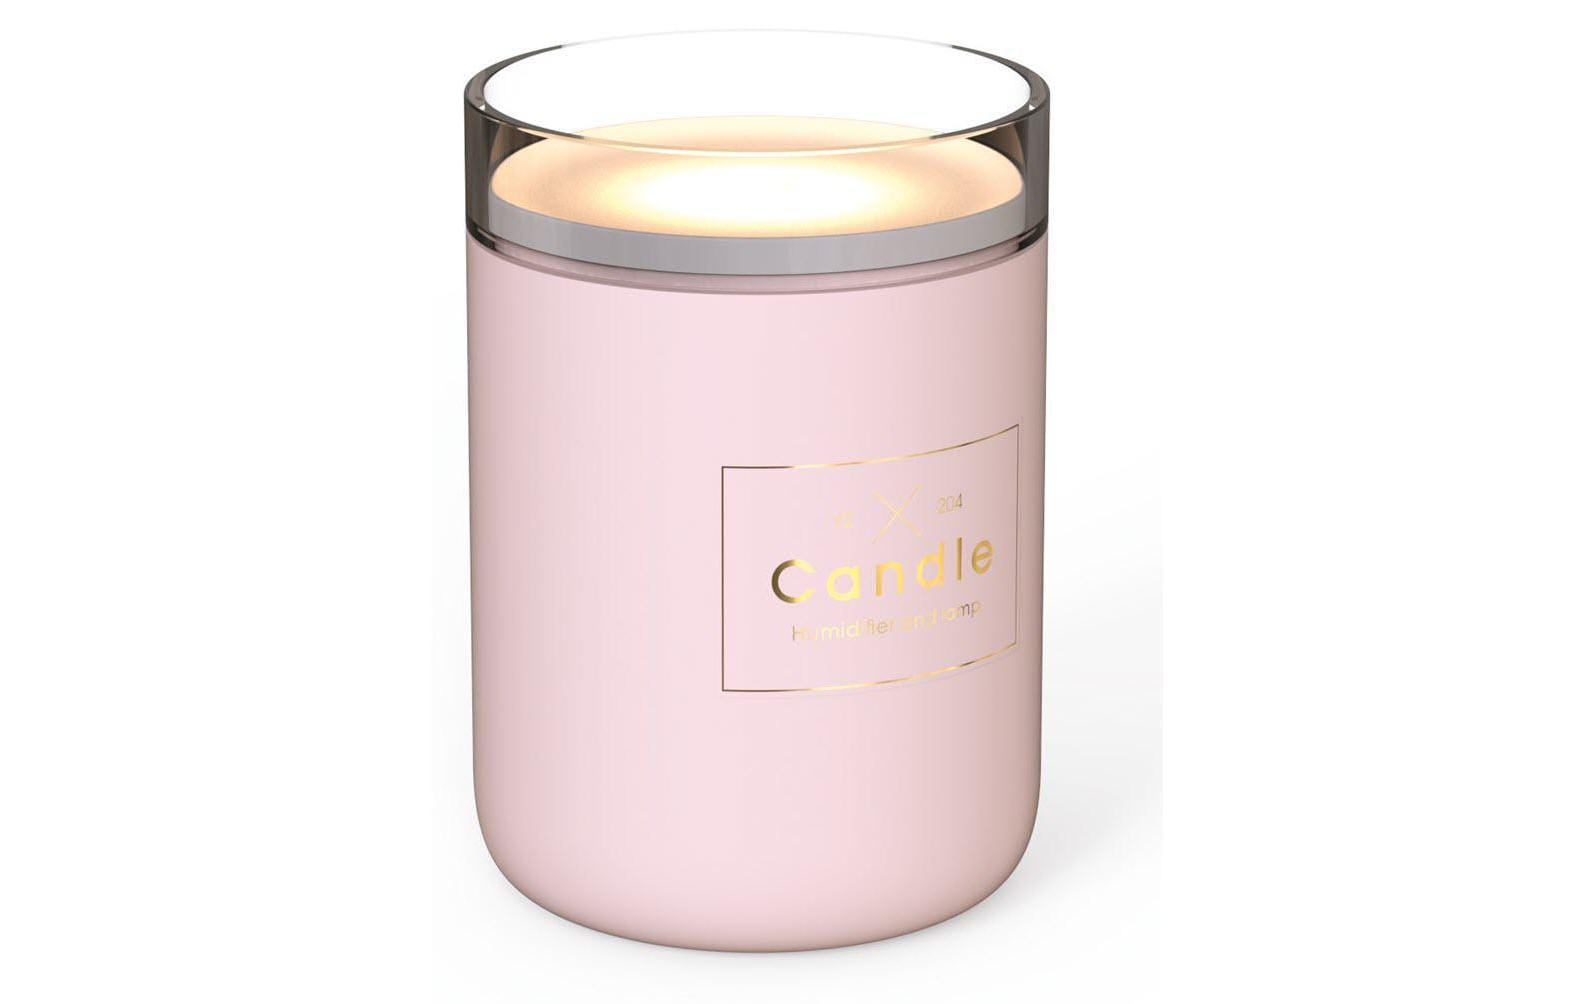 Linuo Mini-Luftbefeuchter Candle GO-204-P Pink